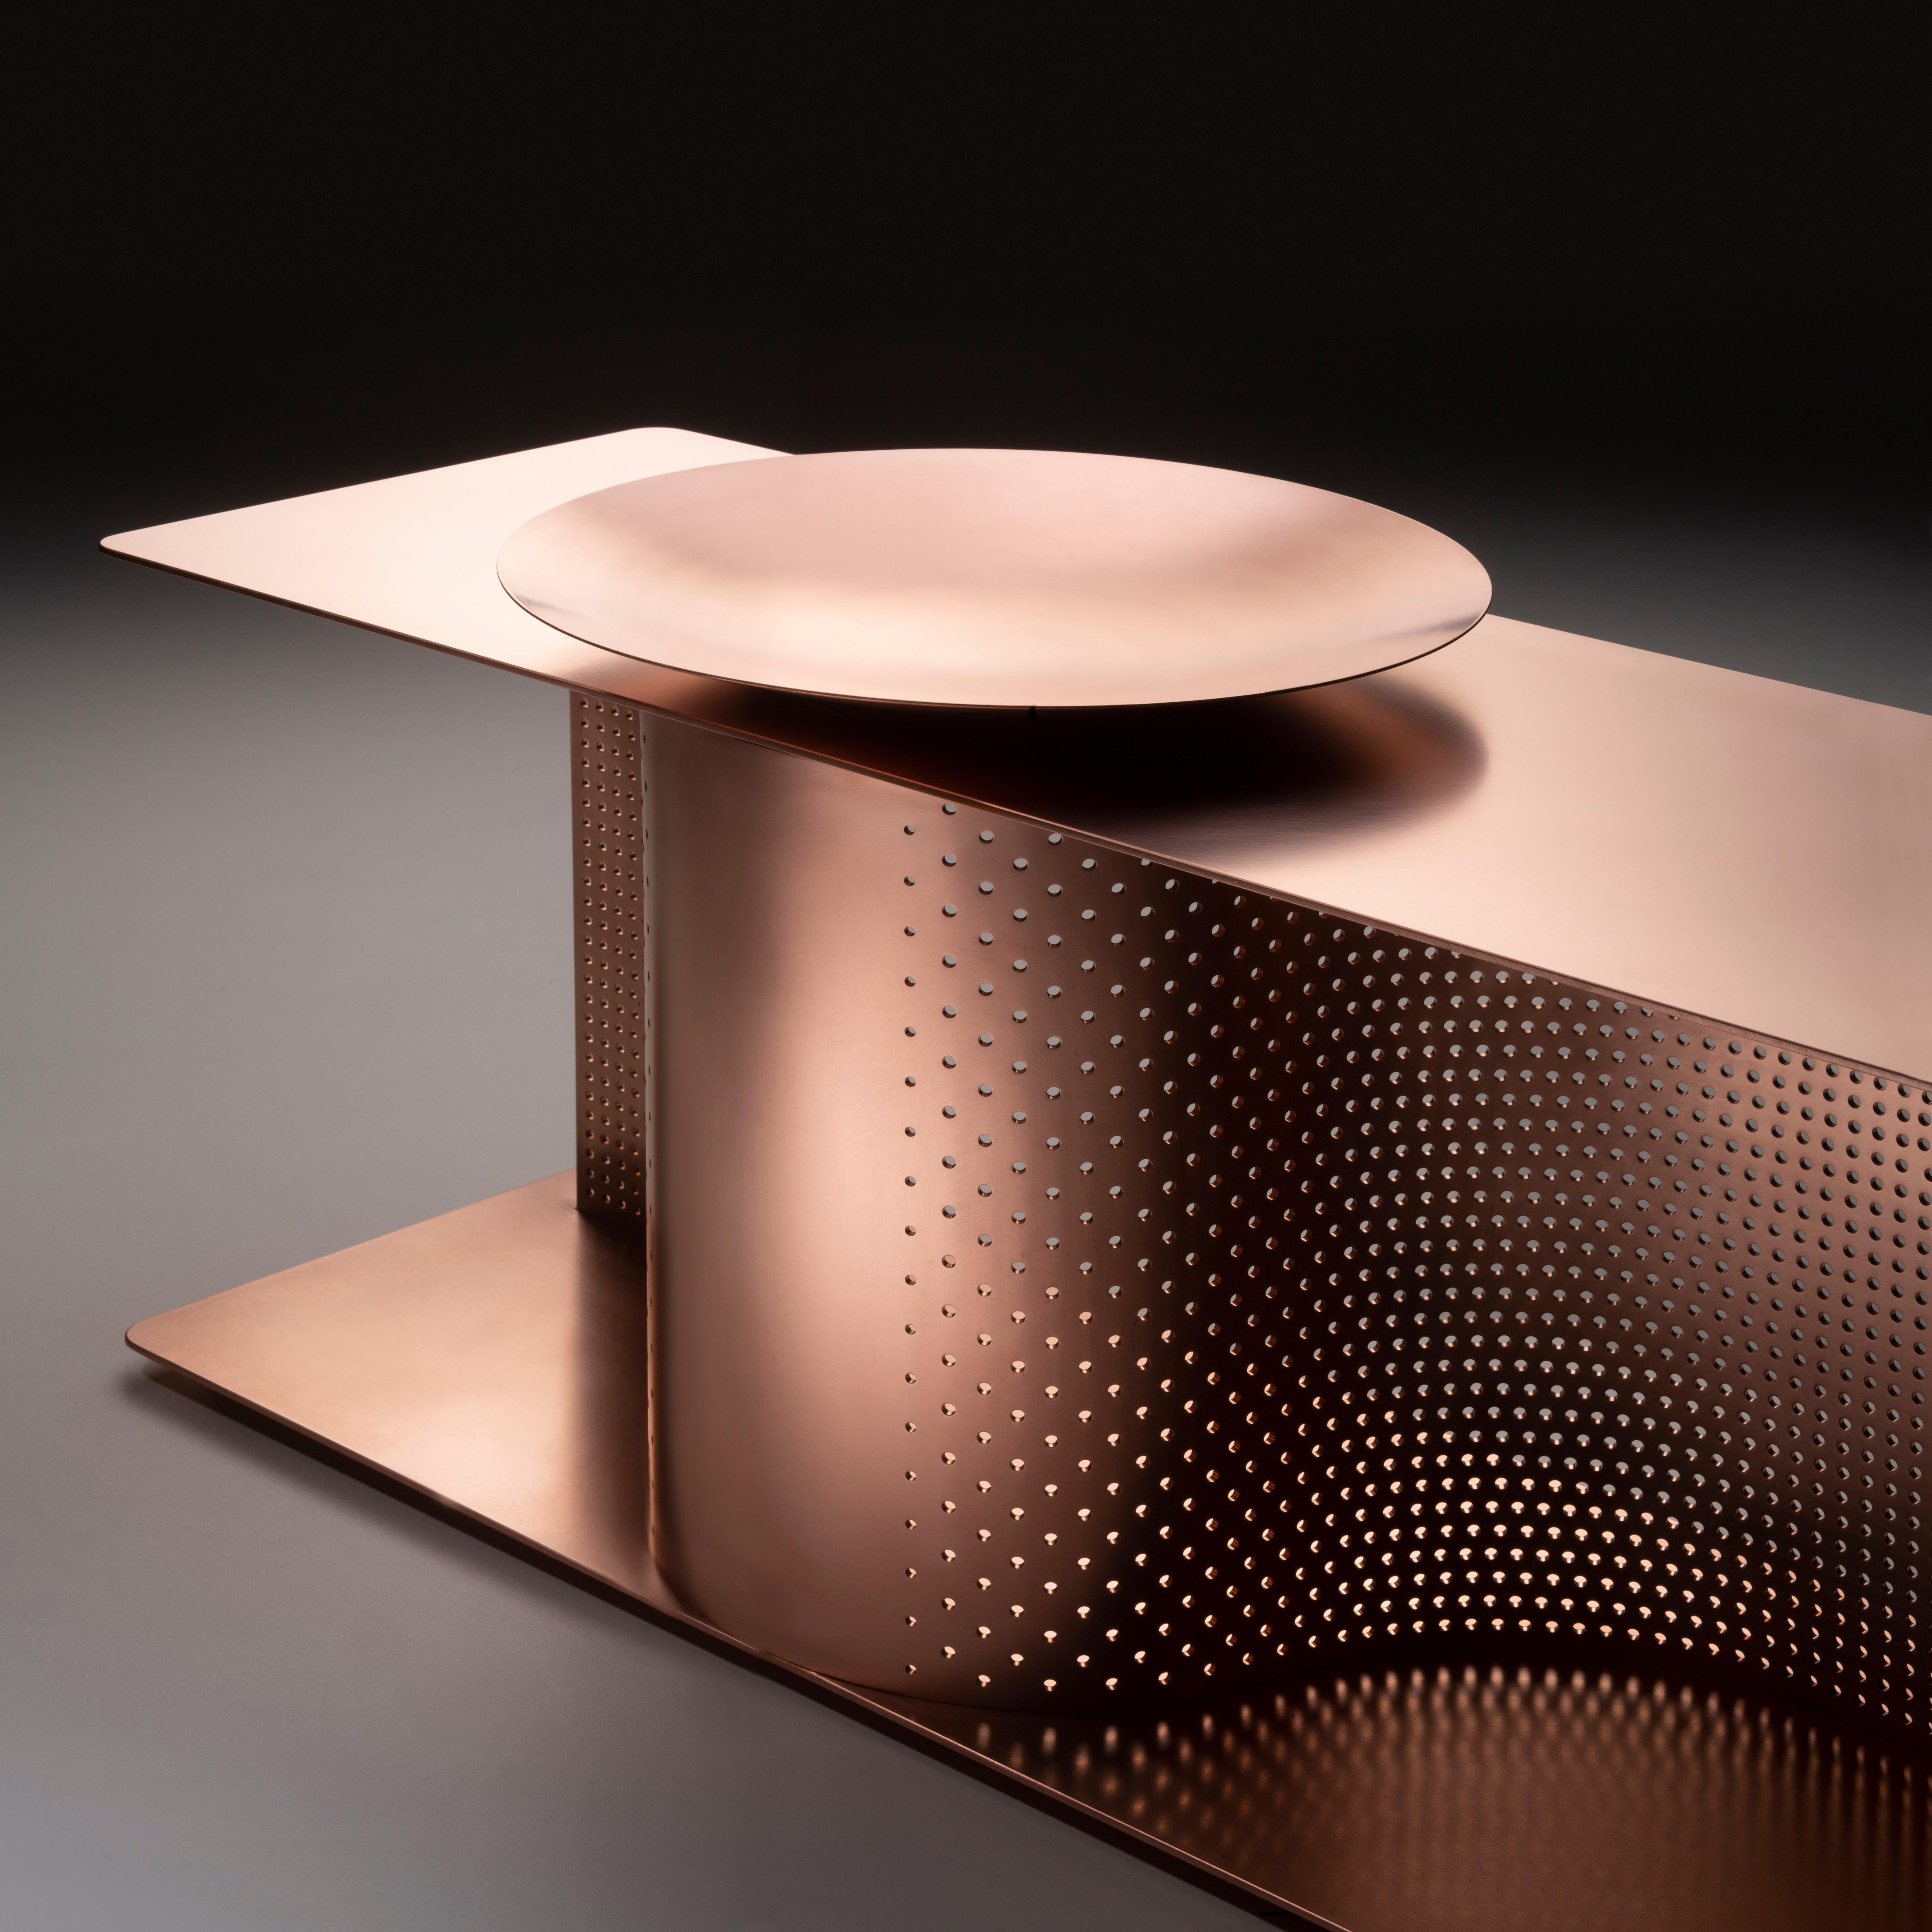 Italian DeCastelli Wave Bench in Natural Brushed Copper by Lanzavecchia + Wai For Sale